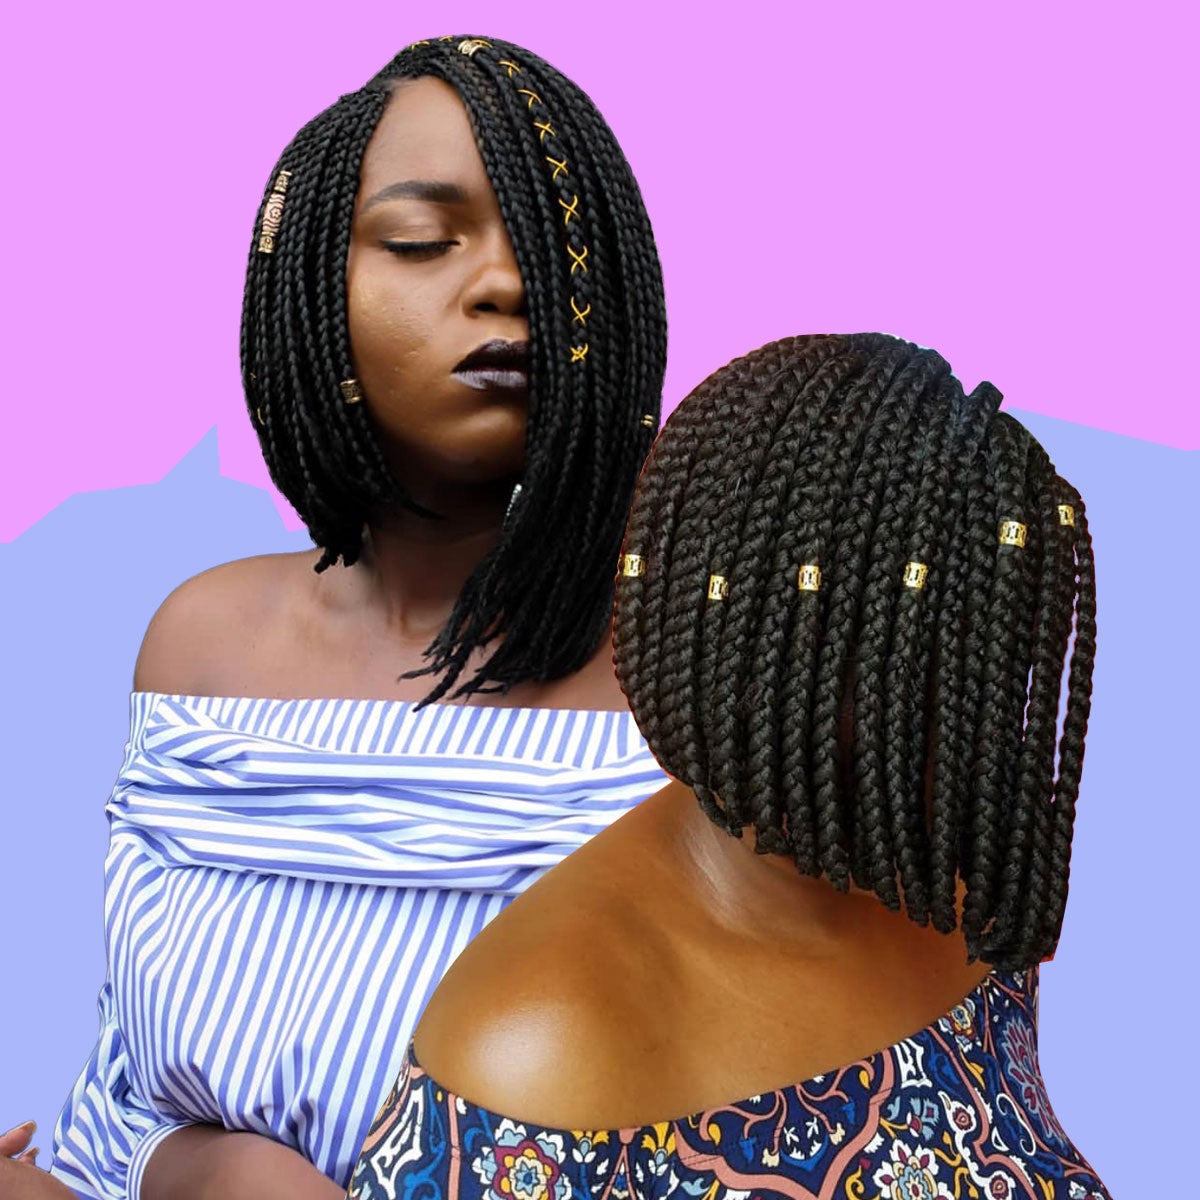 17 Beautiful Braided Bobs From Instagram That You Should